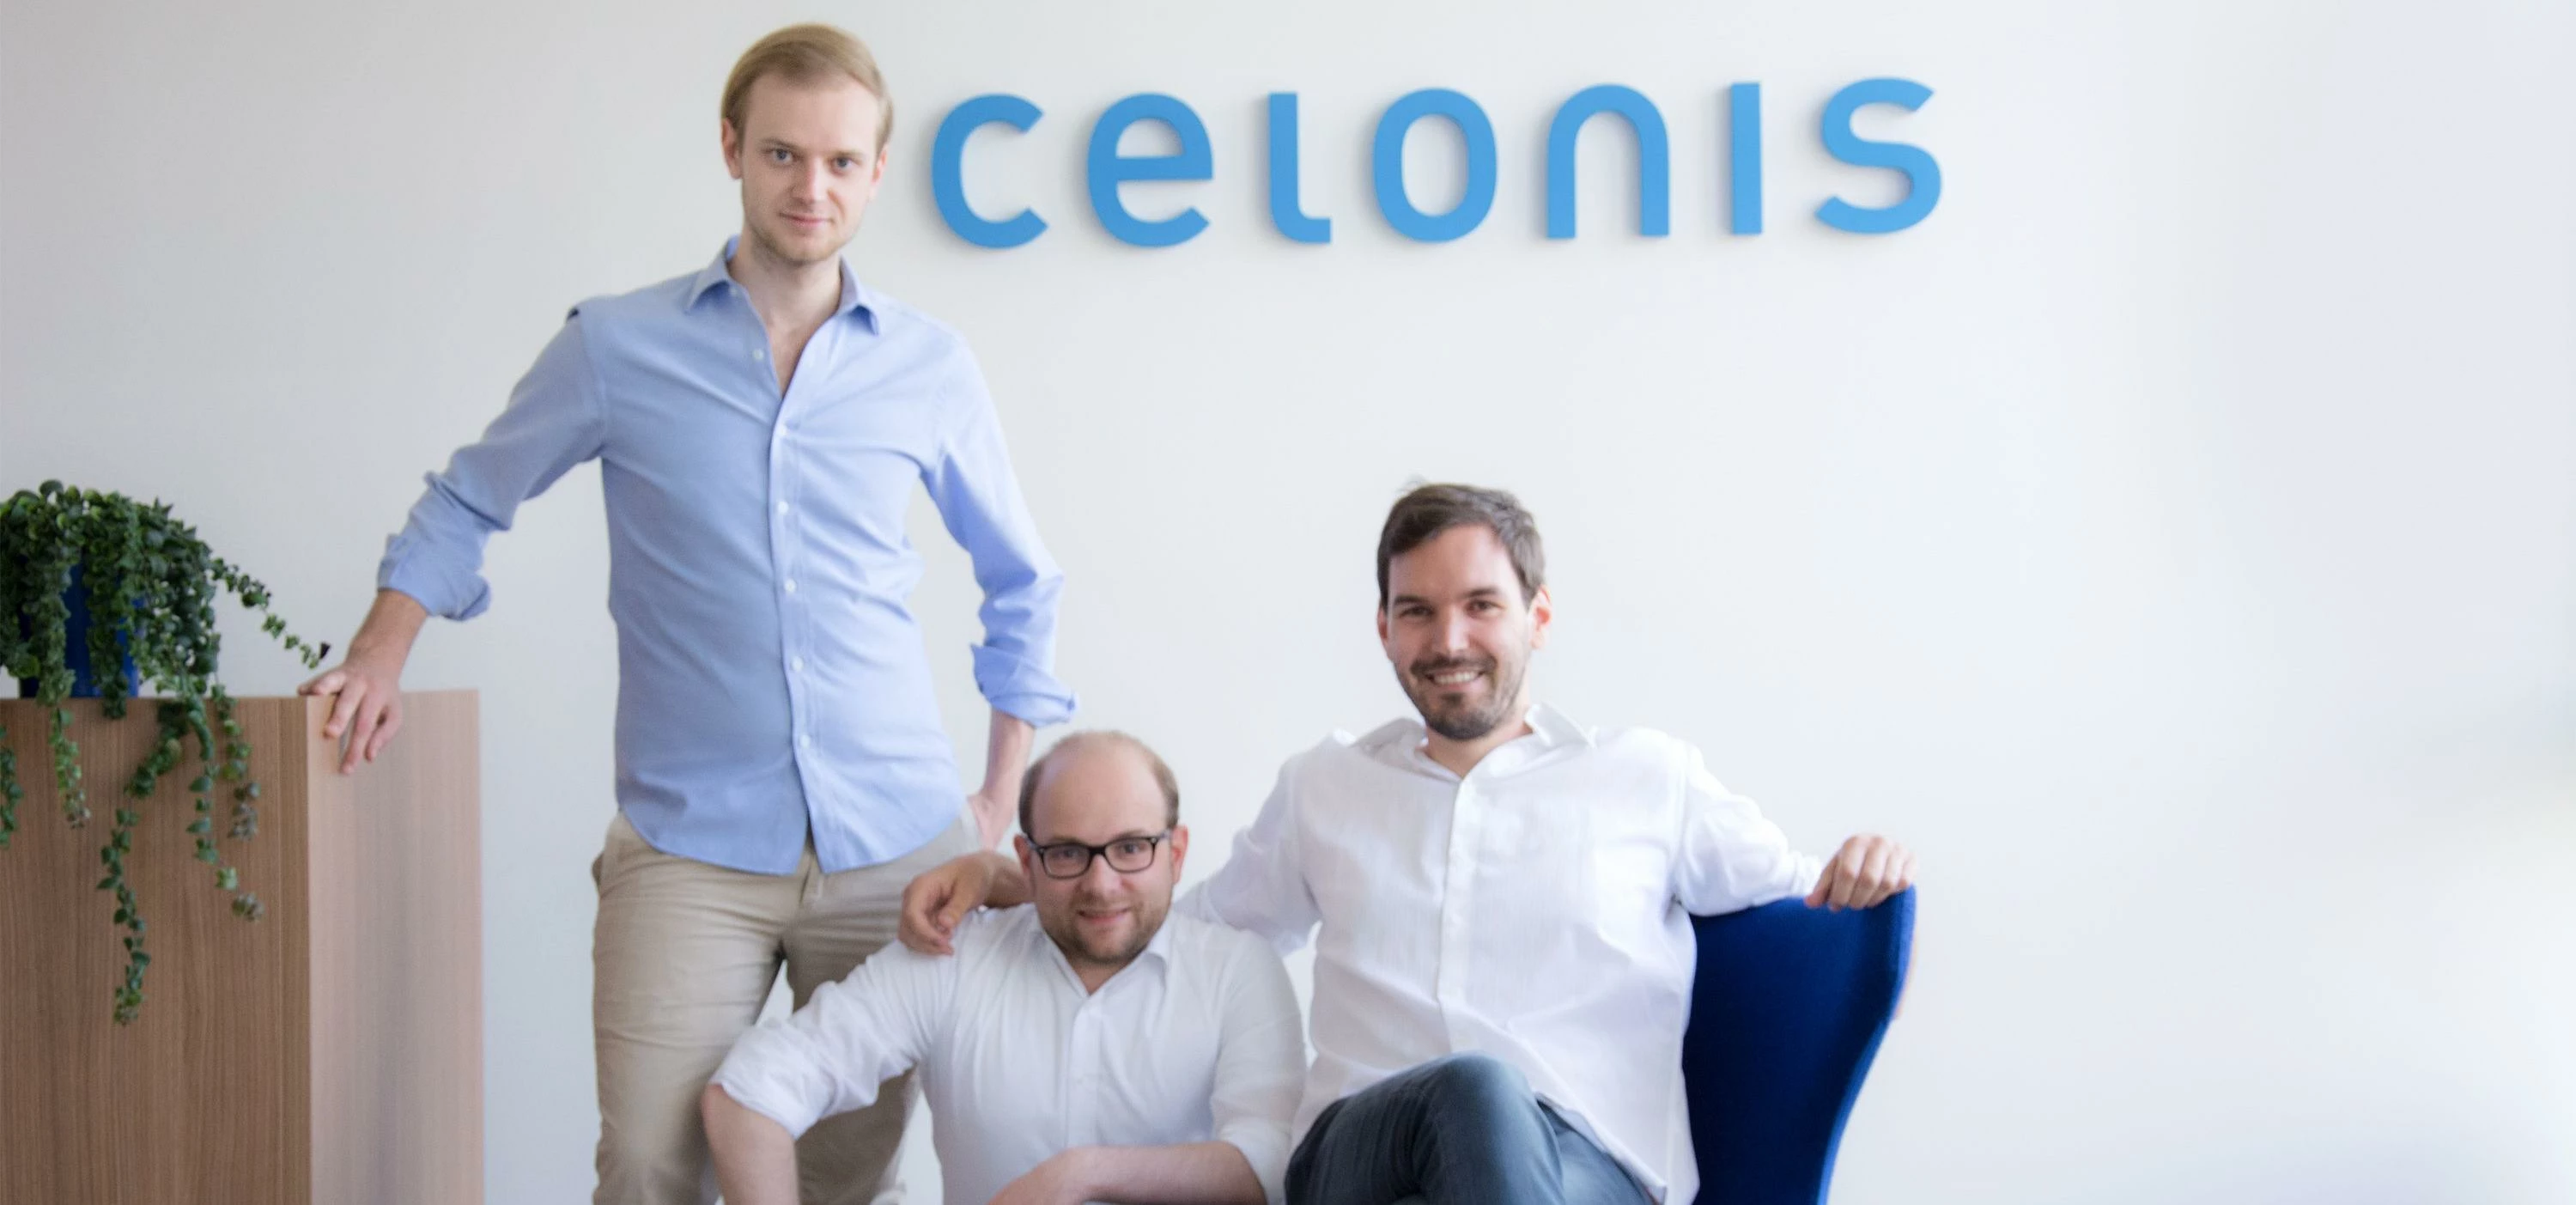 The Celonis founders 